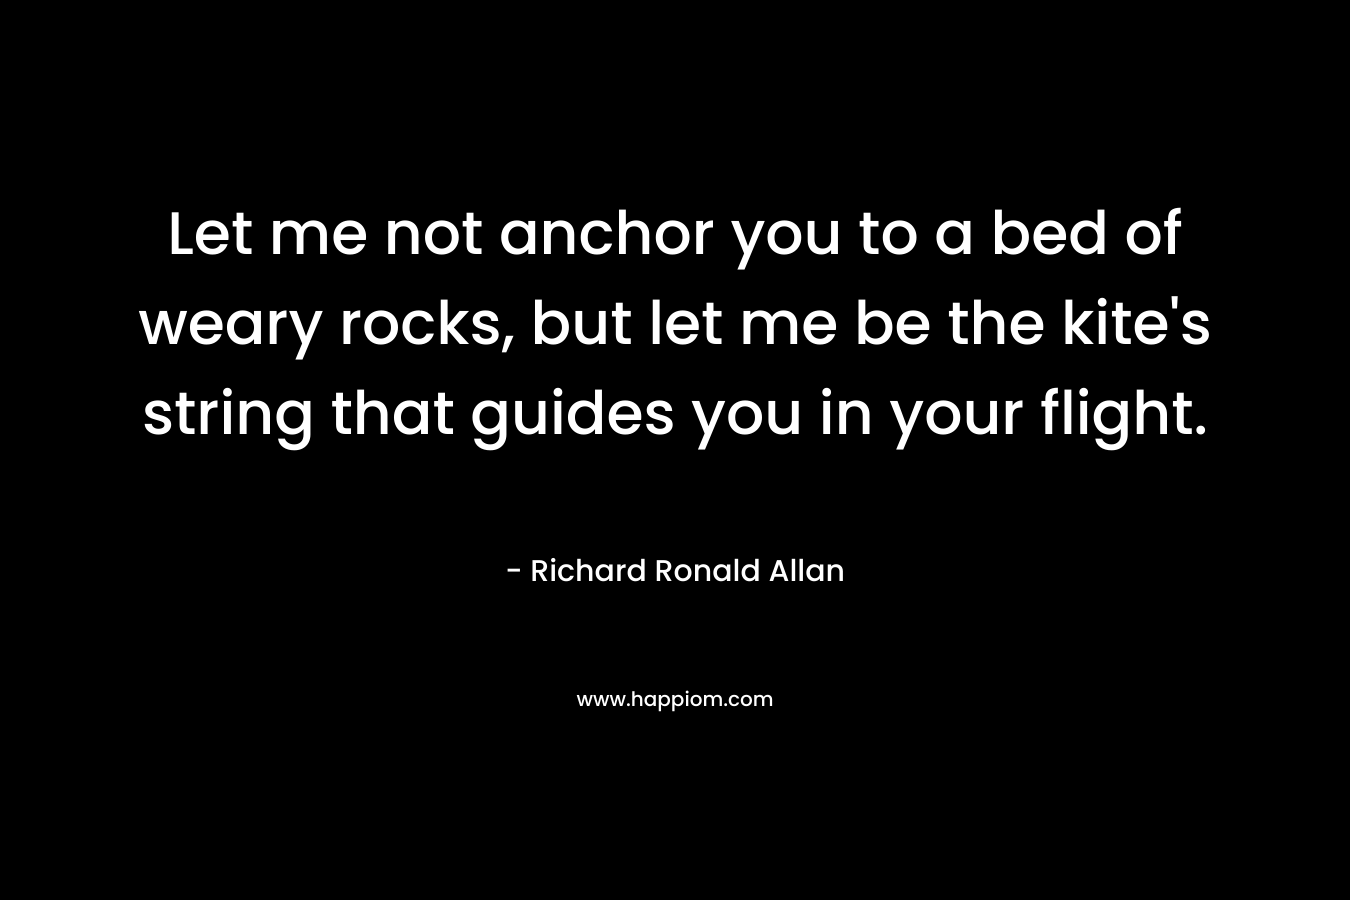 Let me not anchor you to a bed of weary rocks, but let me be the kite's string that guides you in your flight.